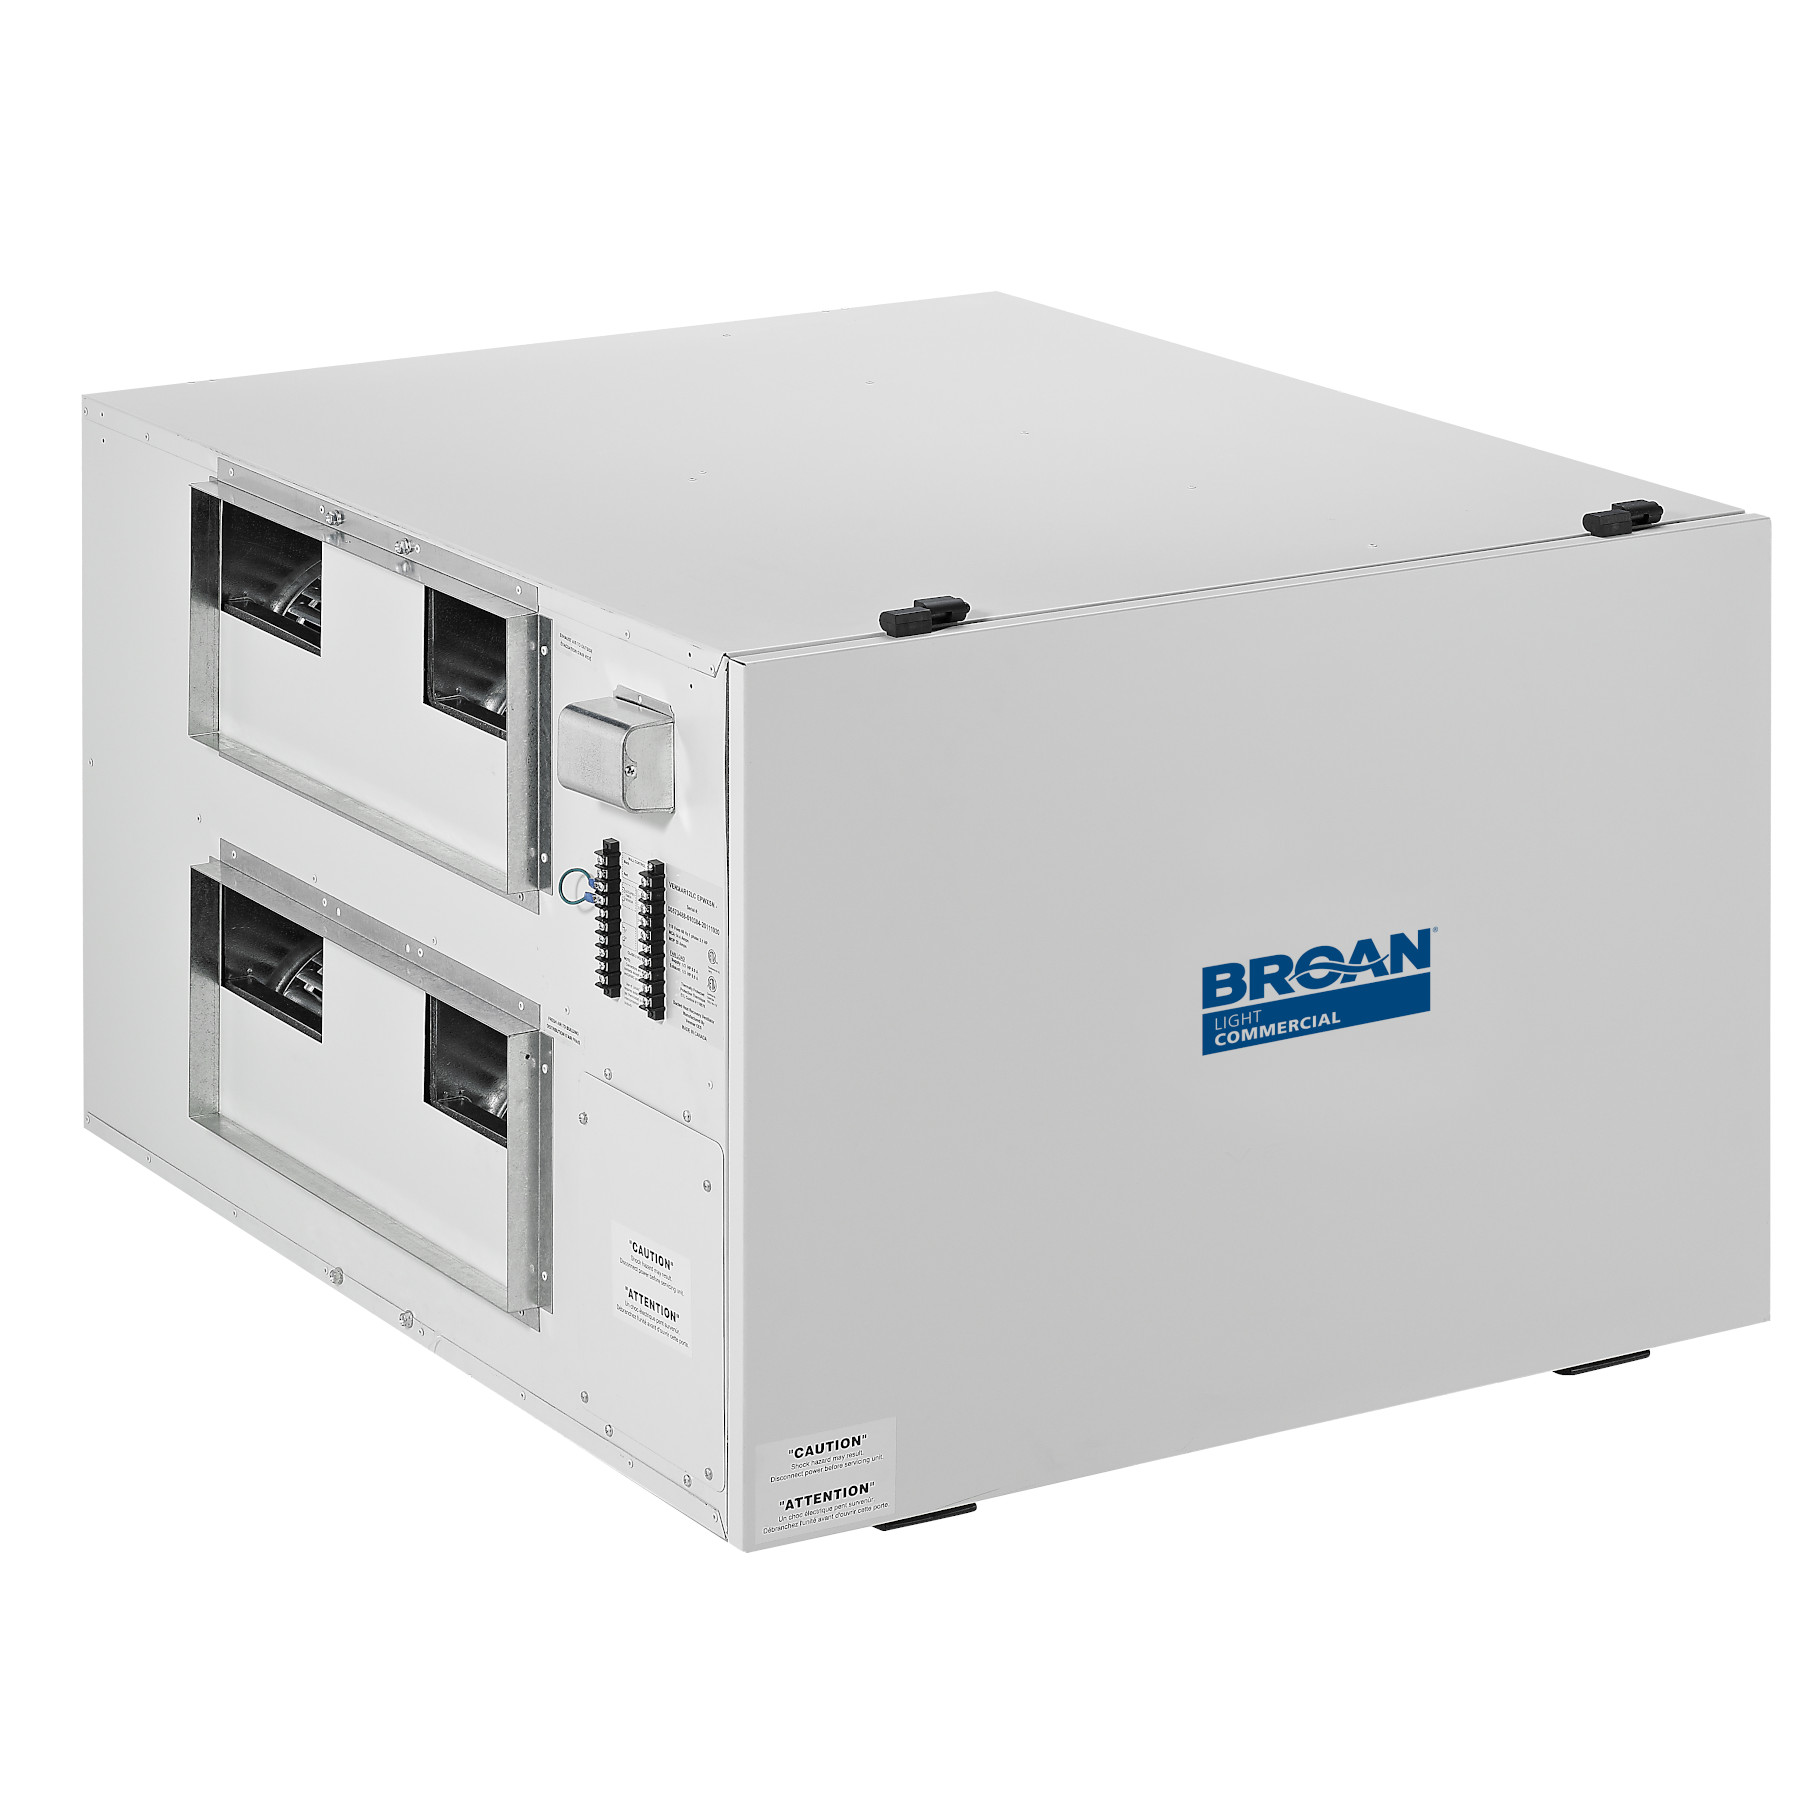 Broan® High Efficiency Heat Recovery Ventilator for Small Businesses, 1026 CFM at 0.4 in. w.g.